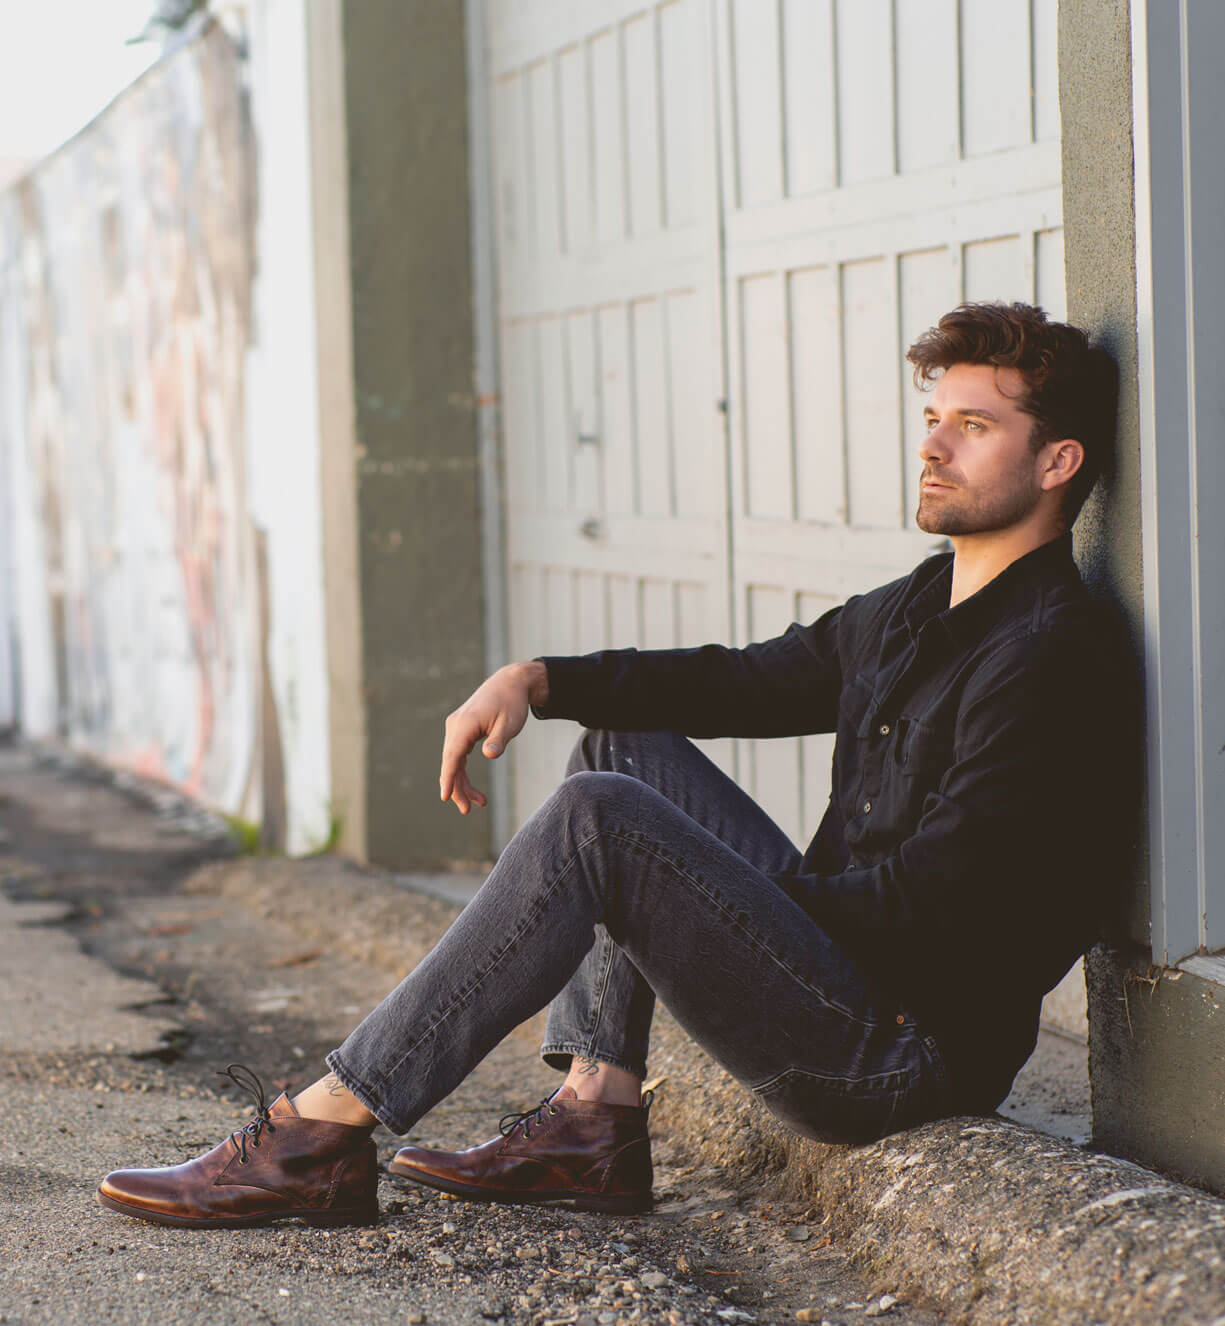 A man in a black shirt and jeans sits leaning against a wall, wearing Bed Stu Illiad Teak Rustic Boots, looking thoughtfully to the side.